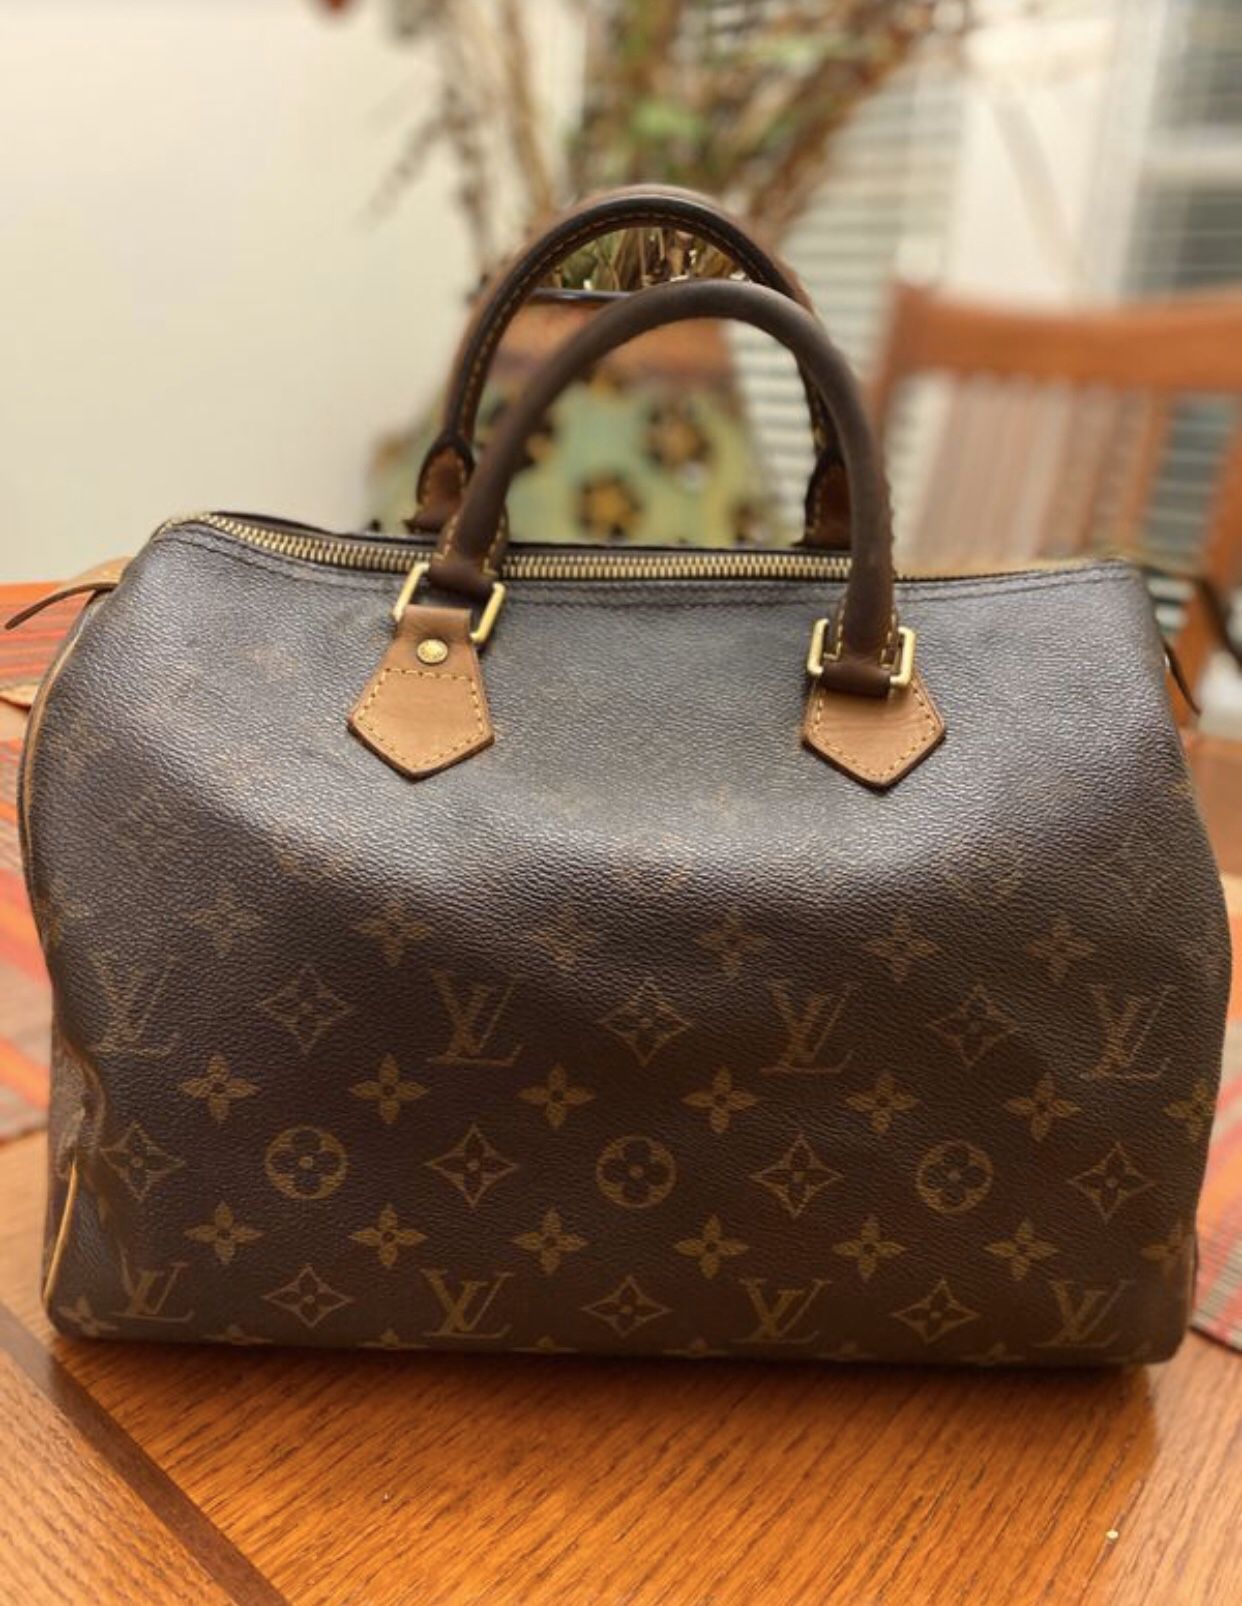 Louis Vuitton Bags for Sale in Jacksonville, FL - OfferUp